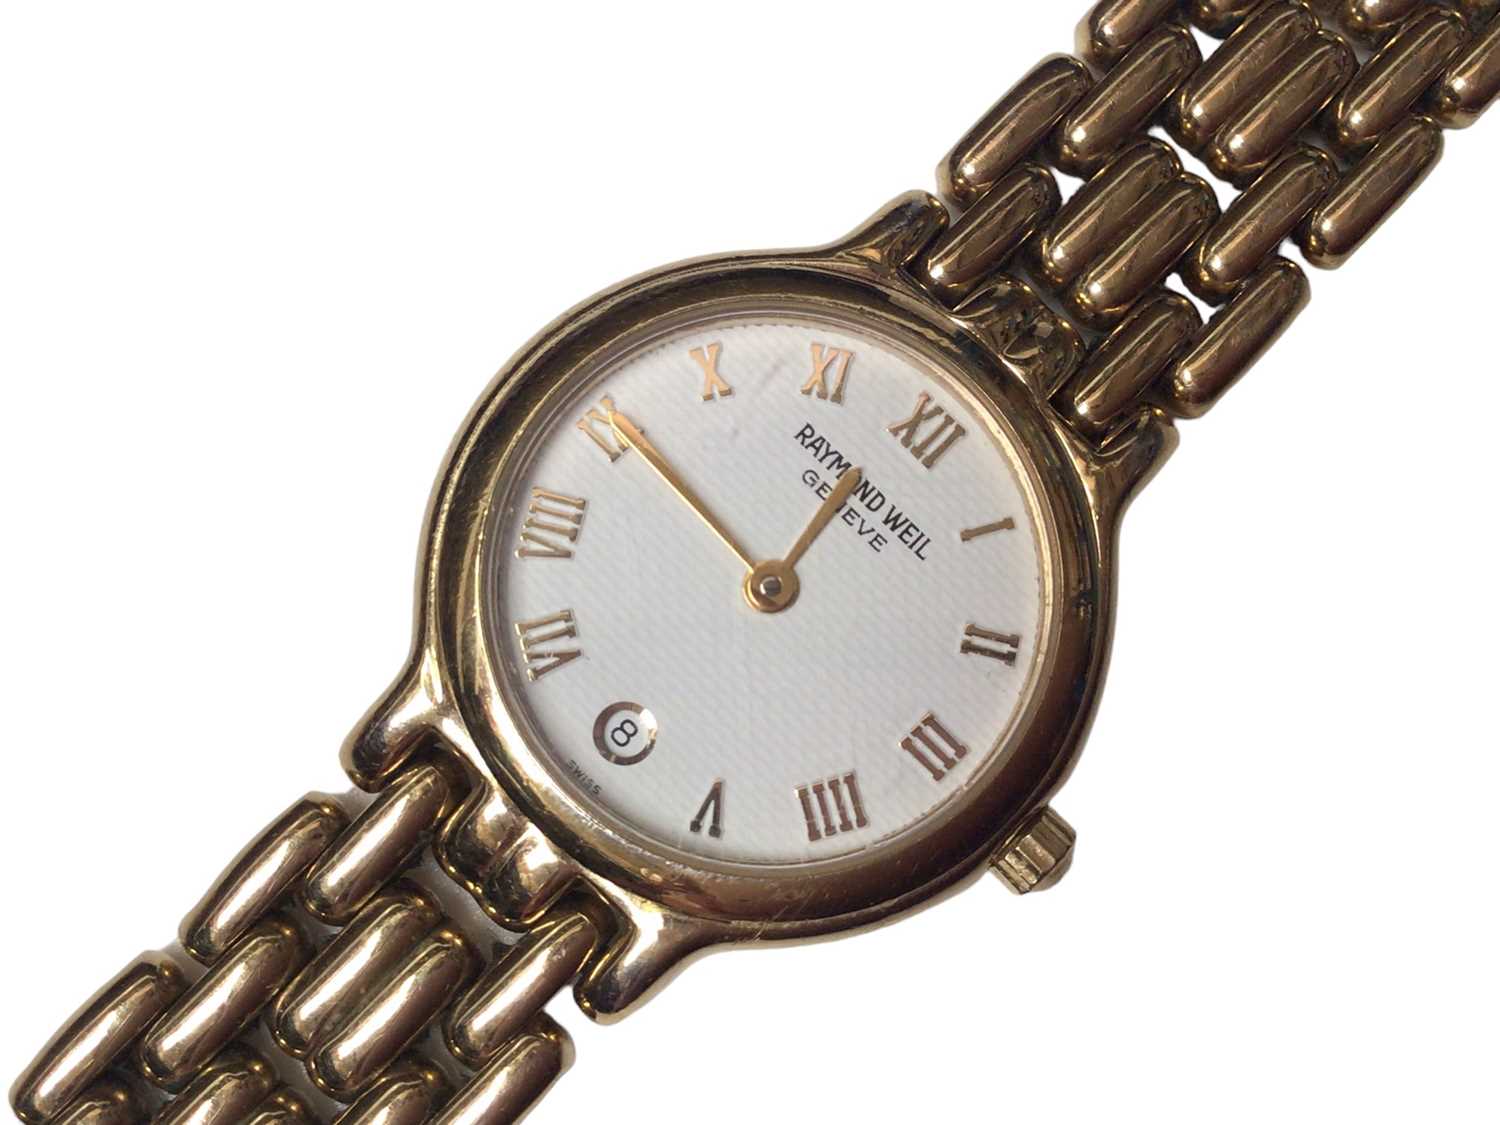 Raymond Weil gold plated ladies wristwatch - Image 3 of 4